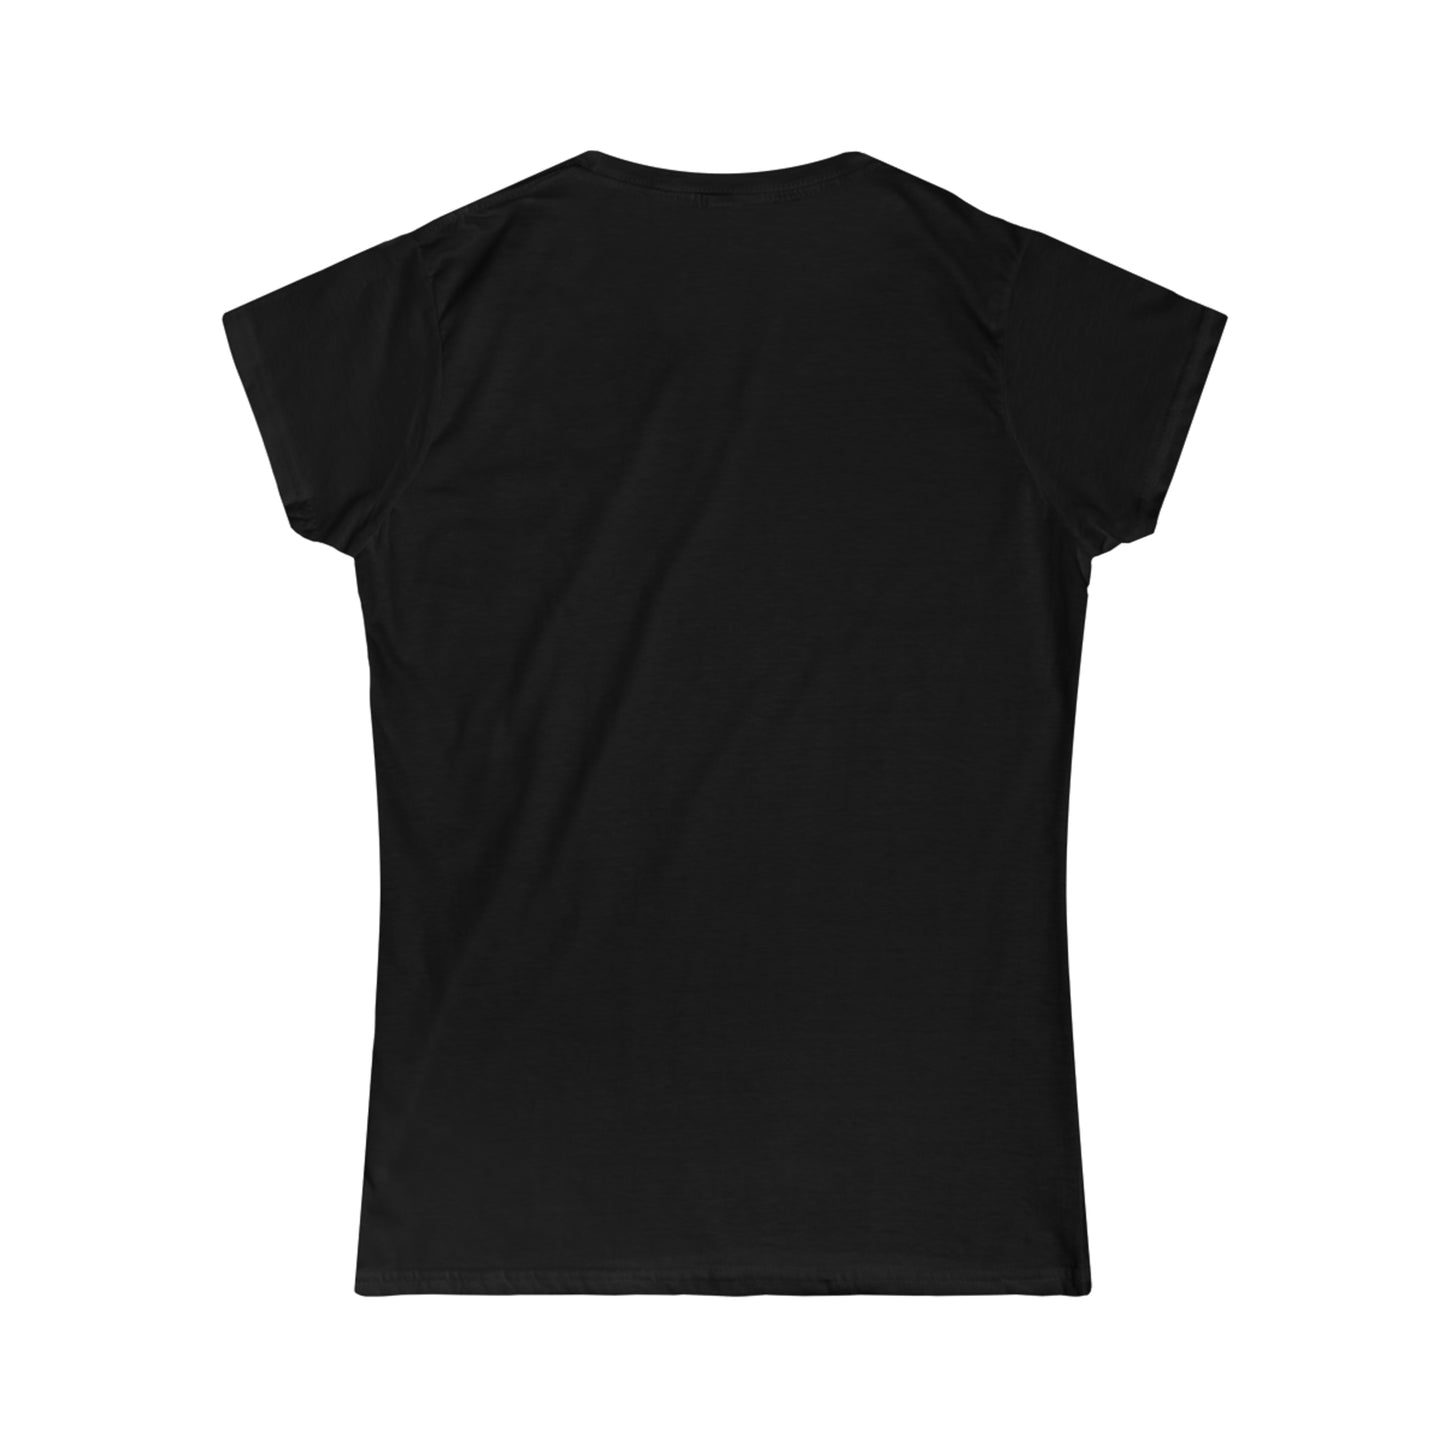 Realtor Definition - Women's Softstyle Tee